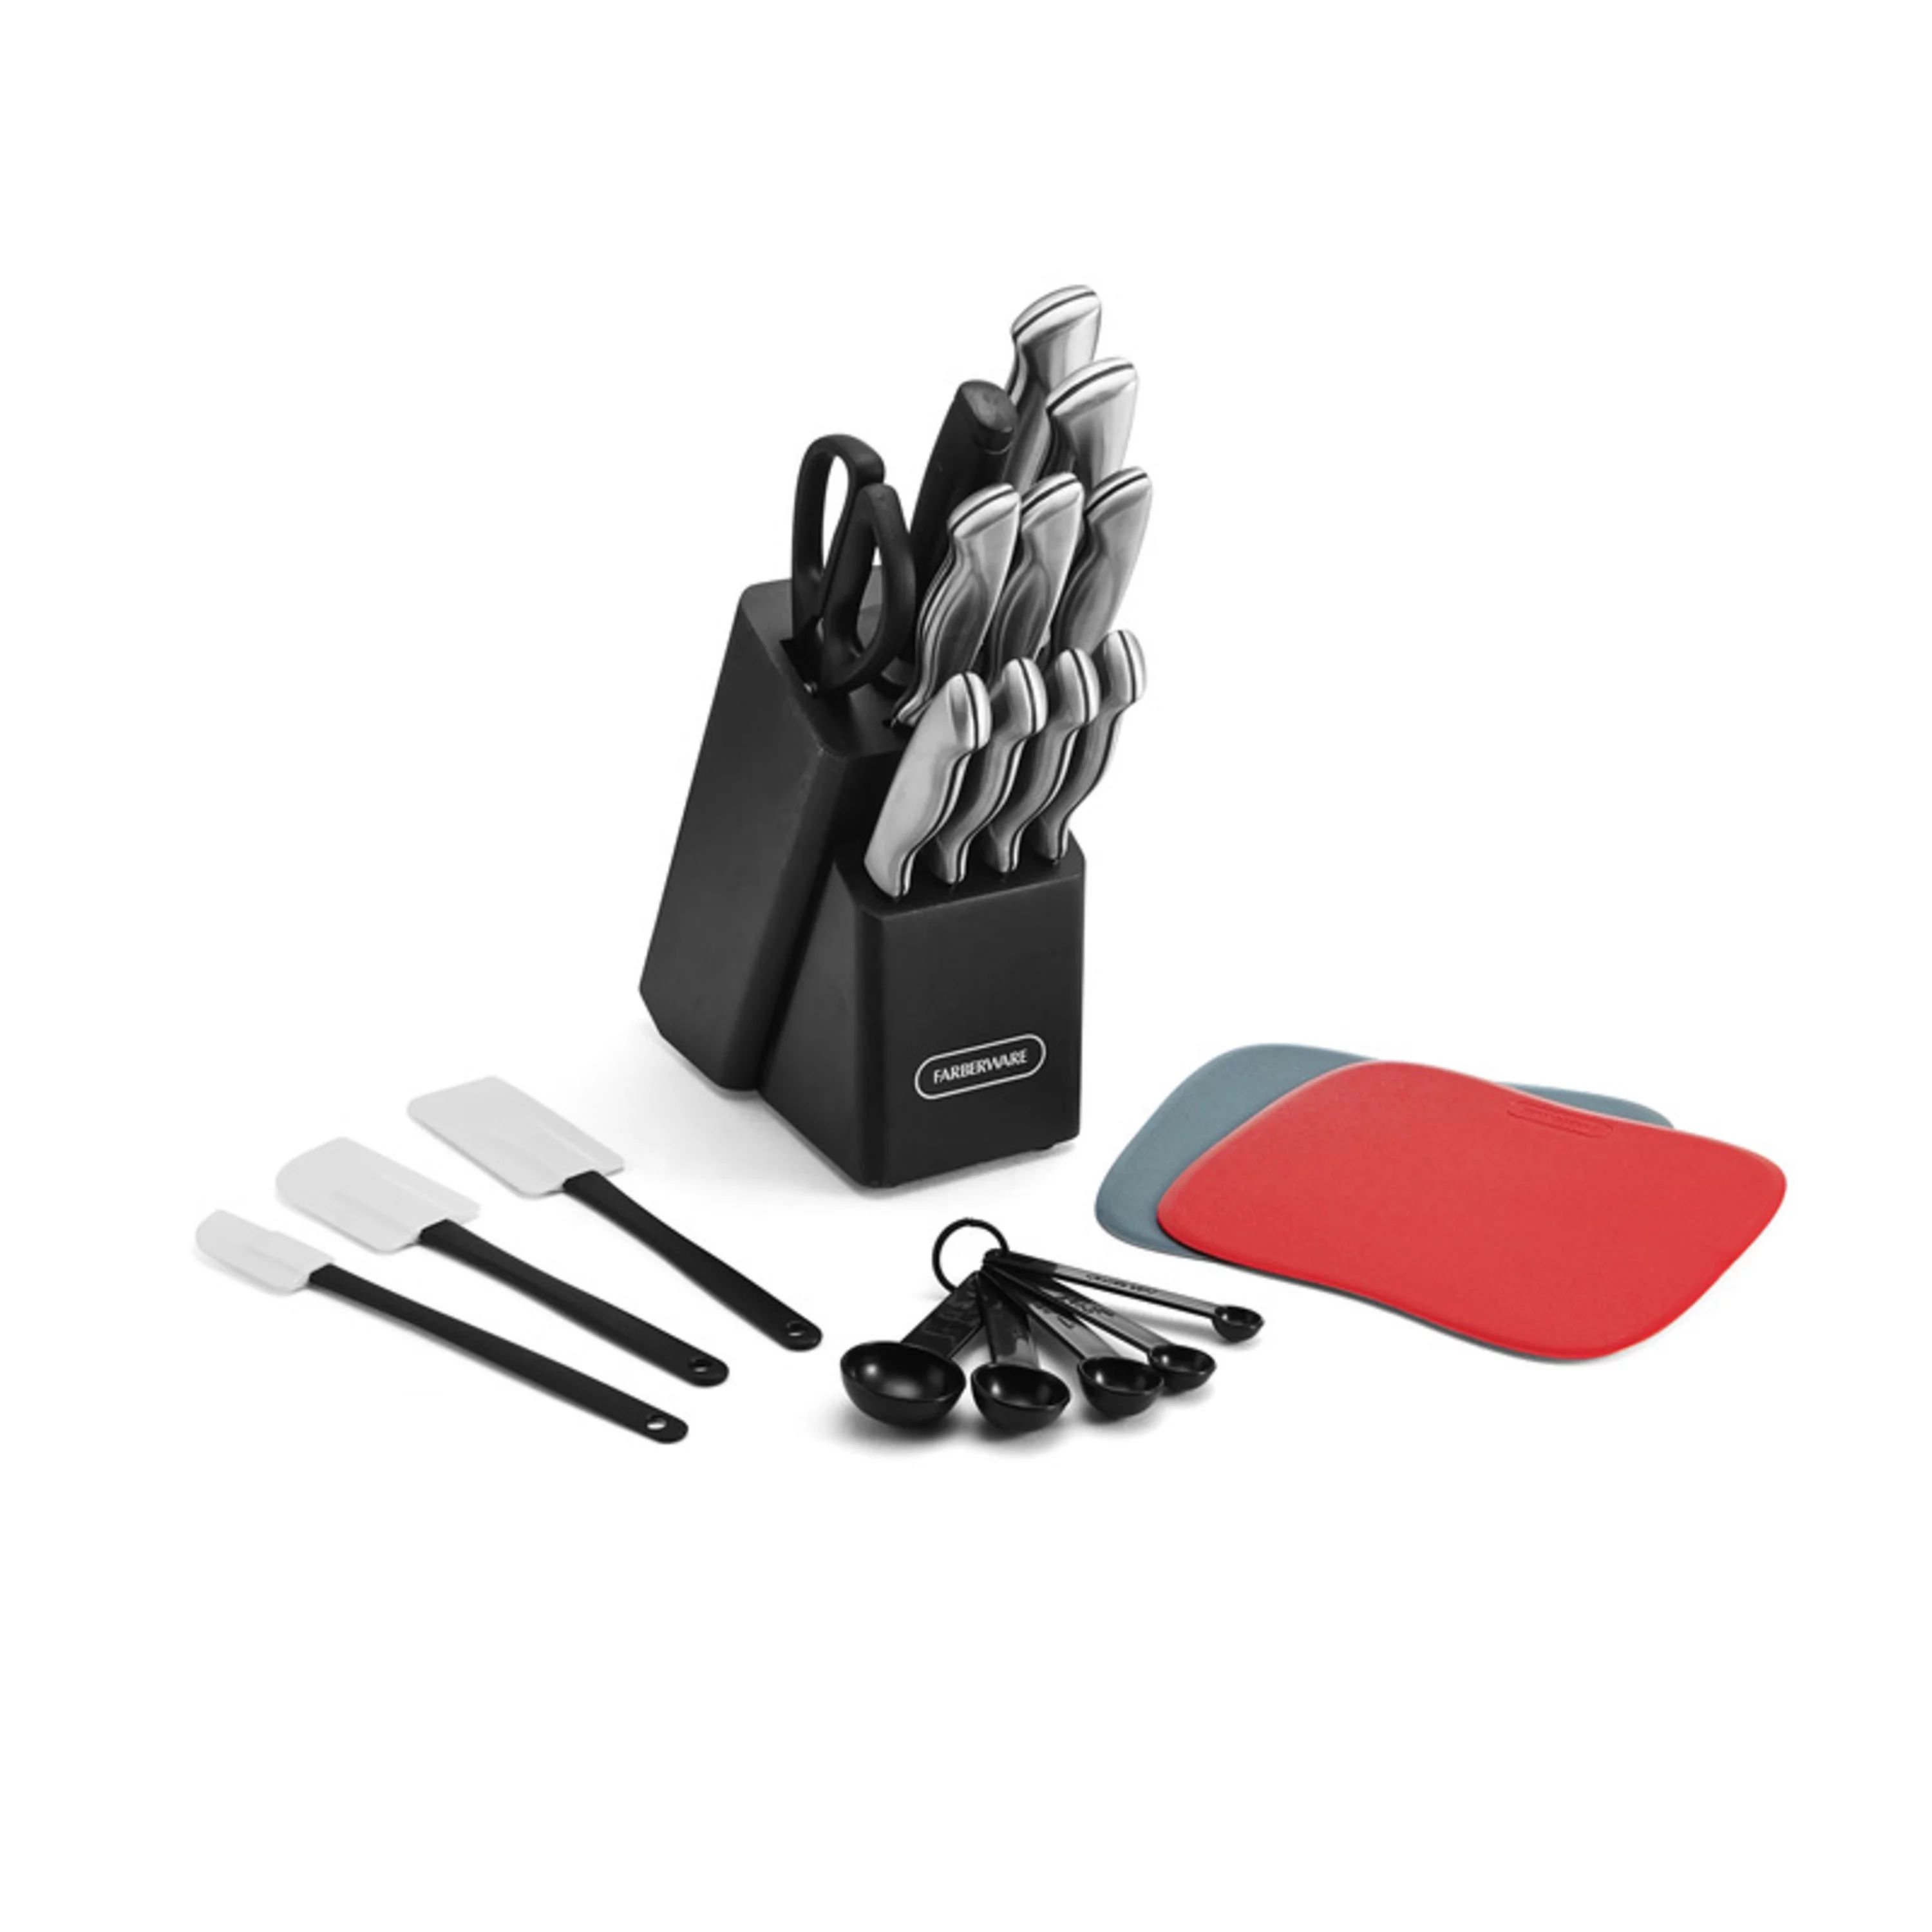 Farberware Classic 22-piece Stamped Stainless Steel Cutlery and Utensil Set | Walmart (US)